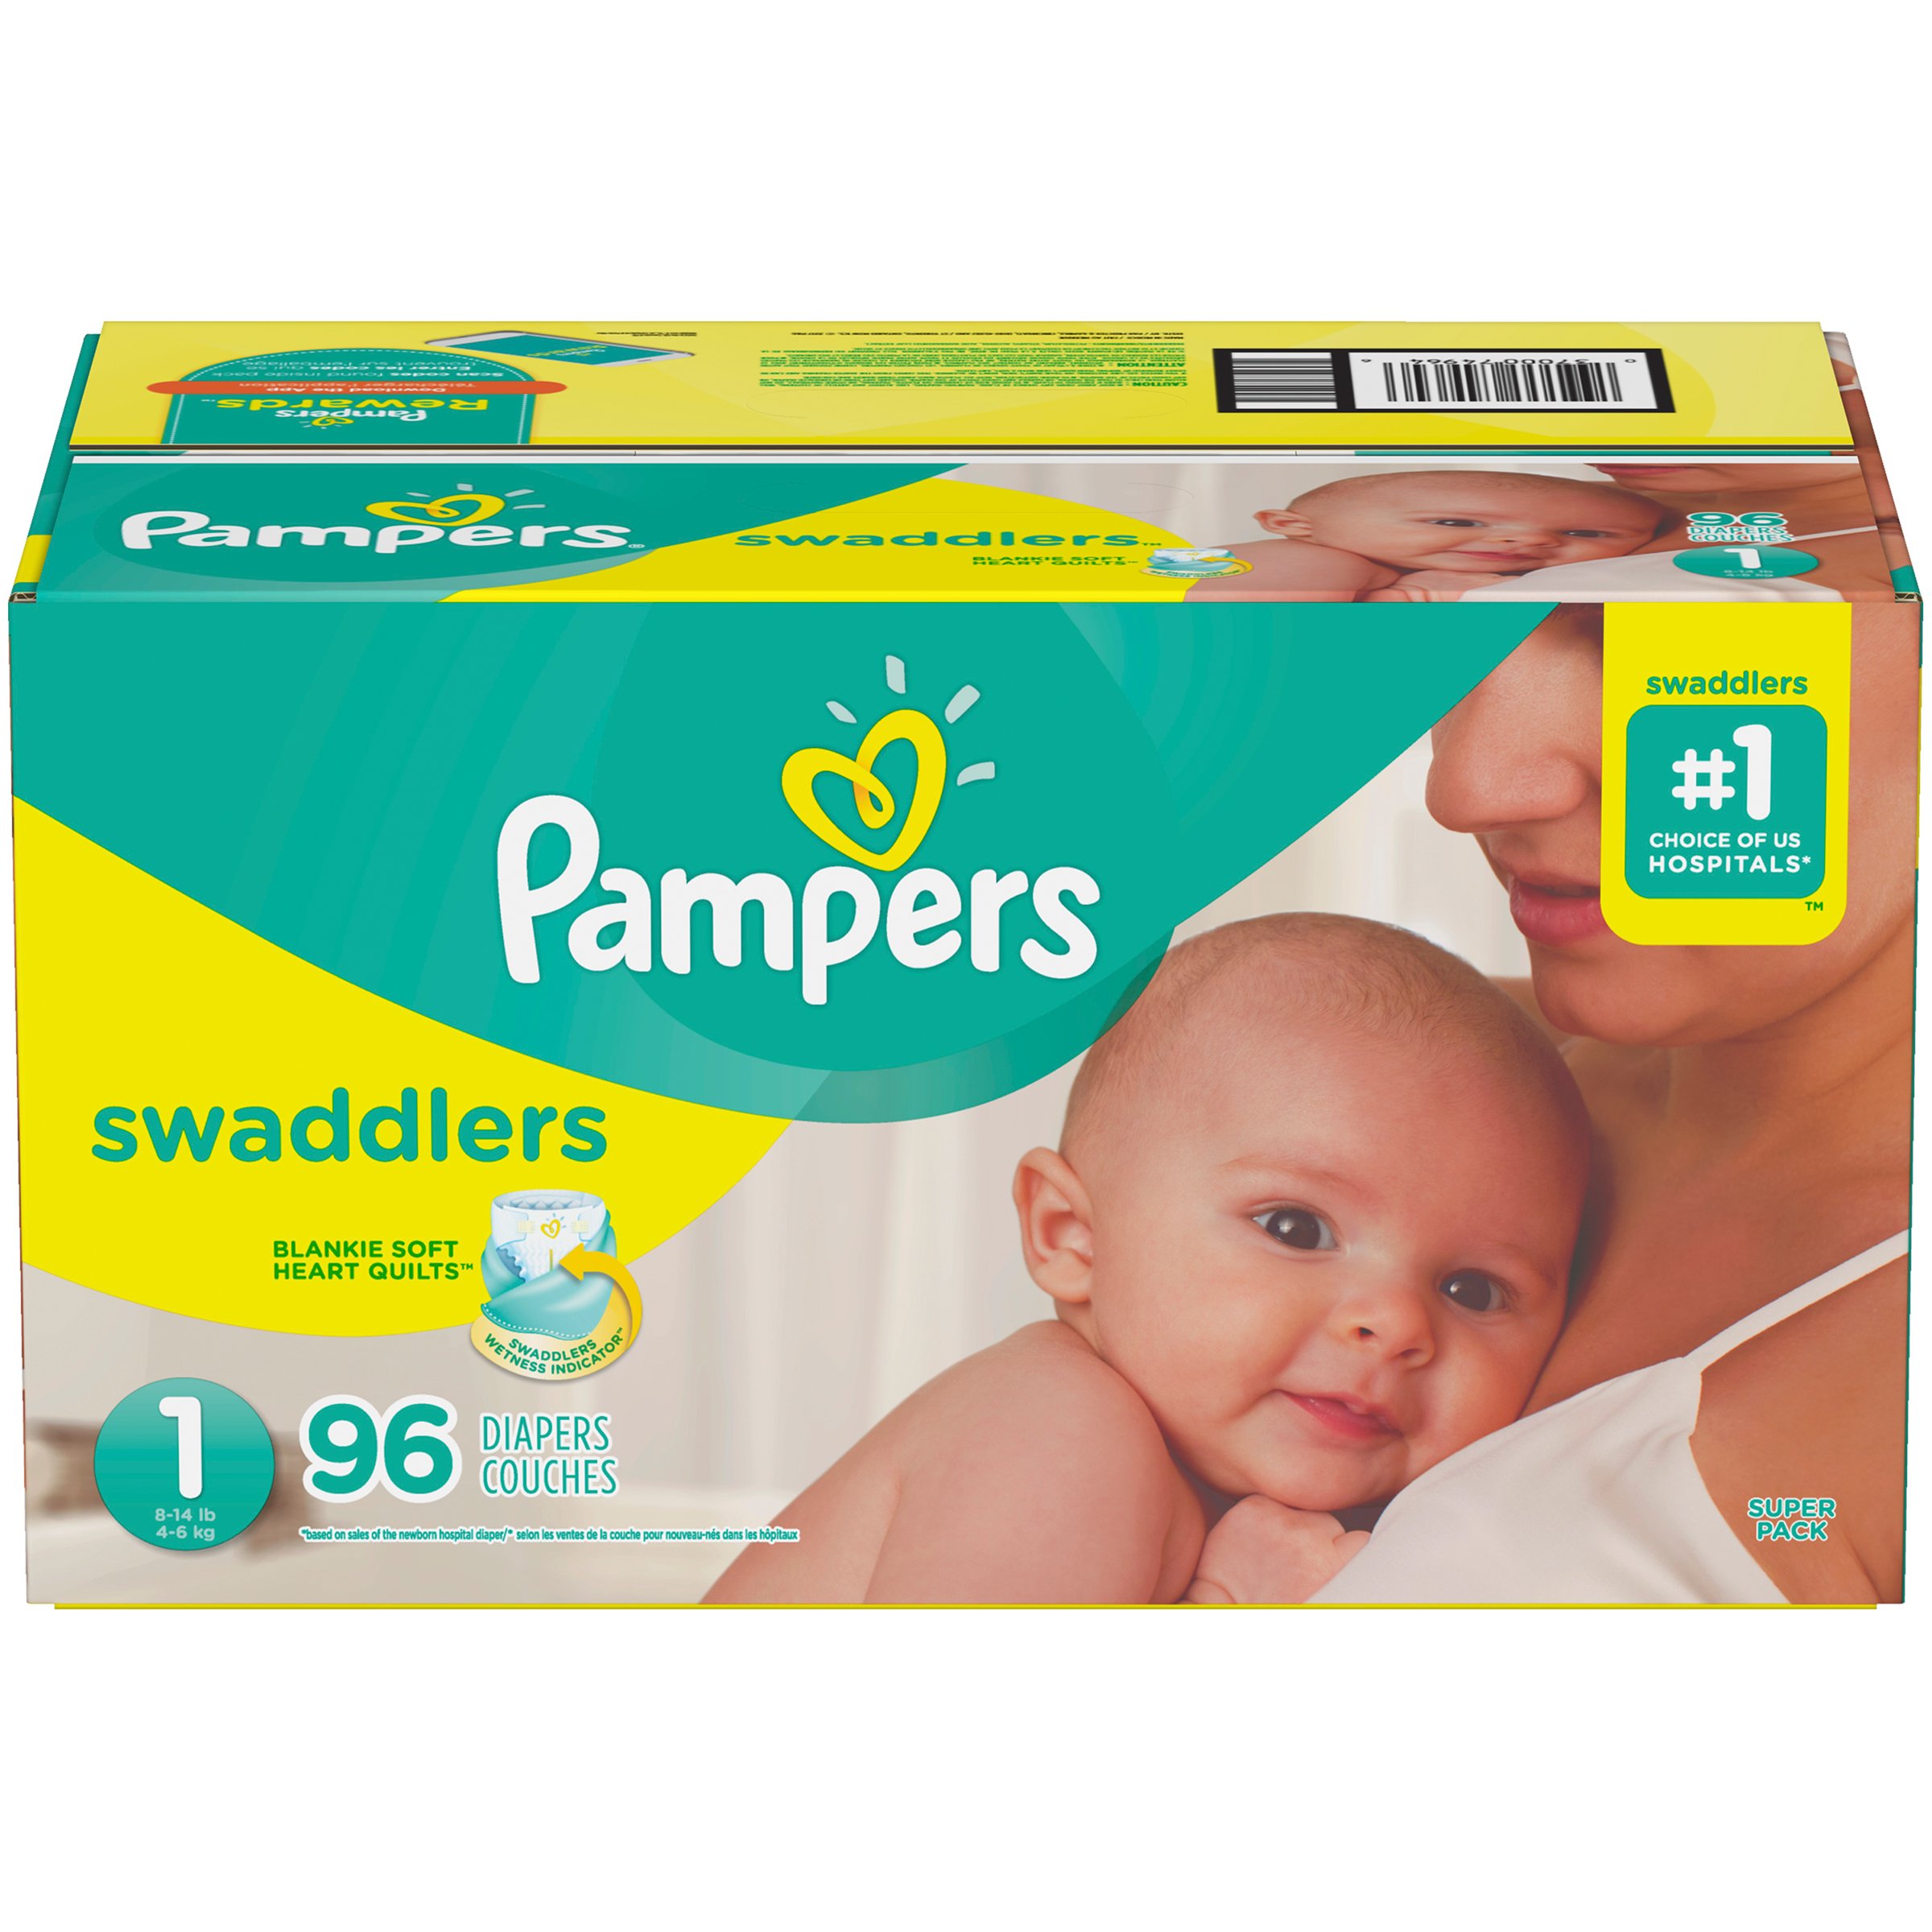 Pampers Swaddlers Newborn Diapers Size 1 96 Count